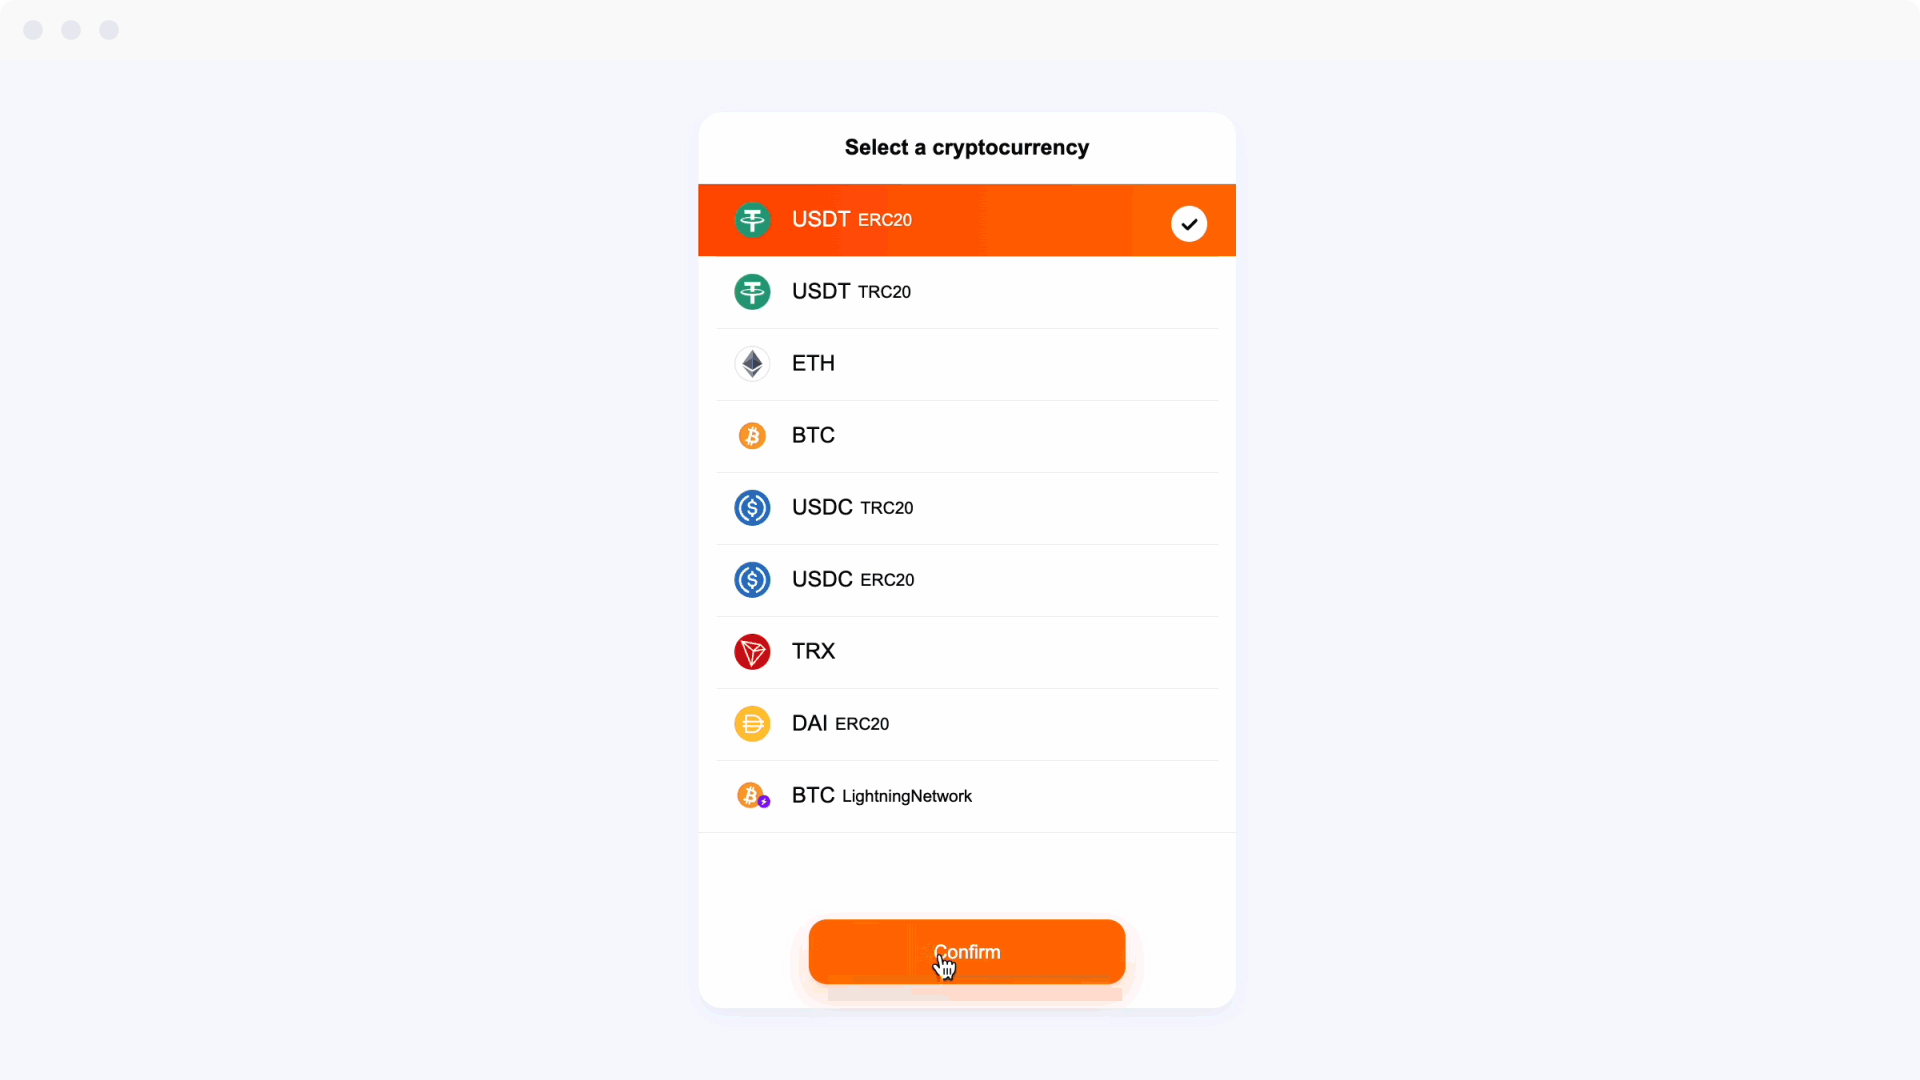 Select a crypto and pay.